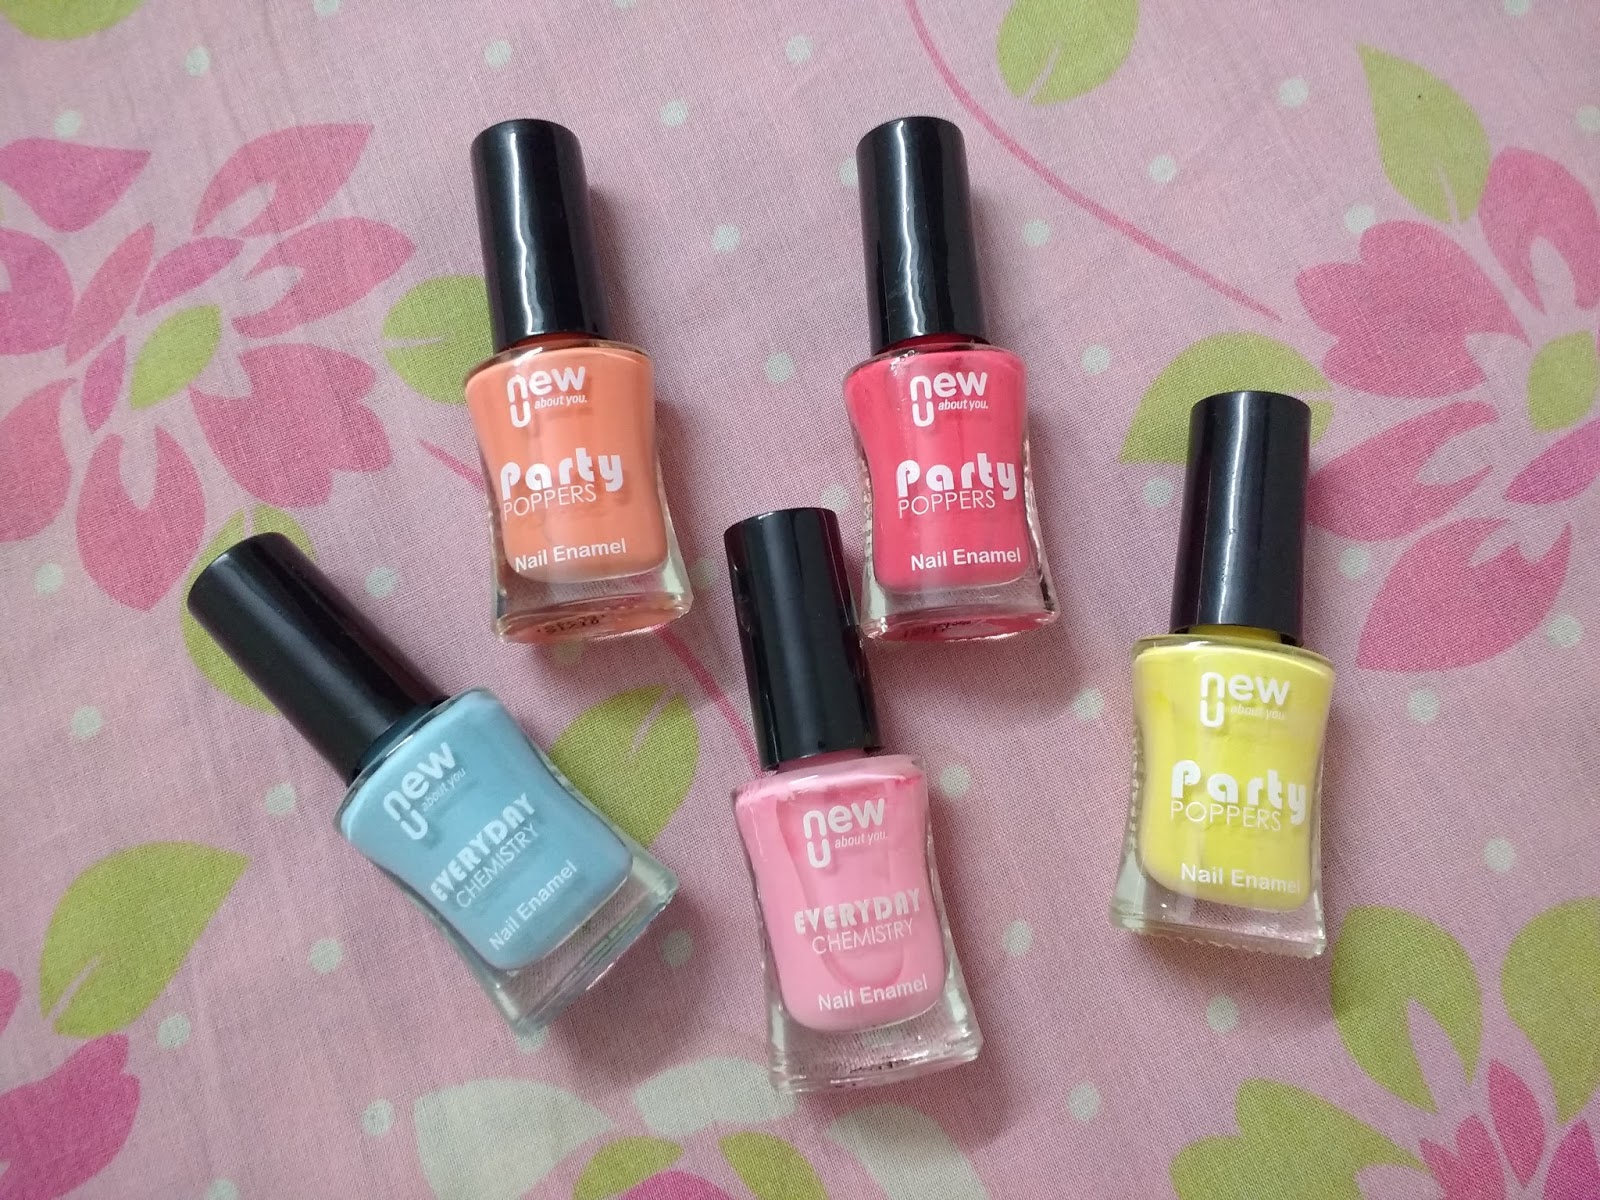 5. How to Choose Safe Nail Polish Brands - wide 4